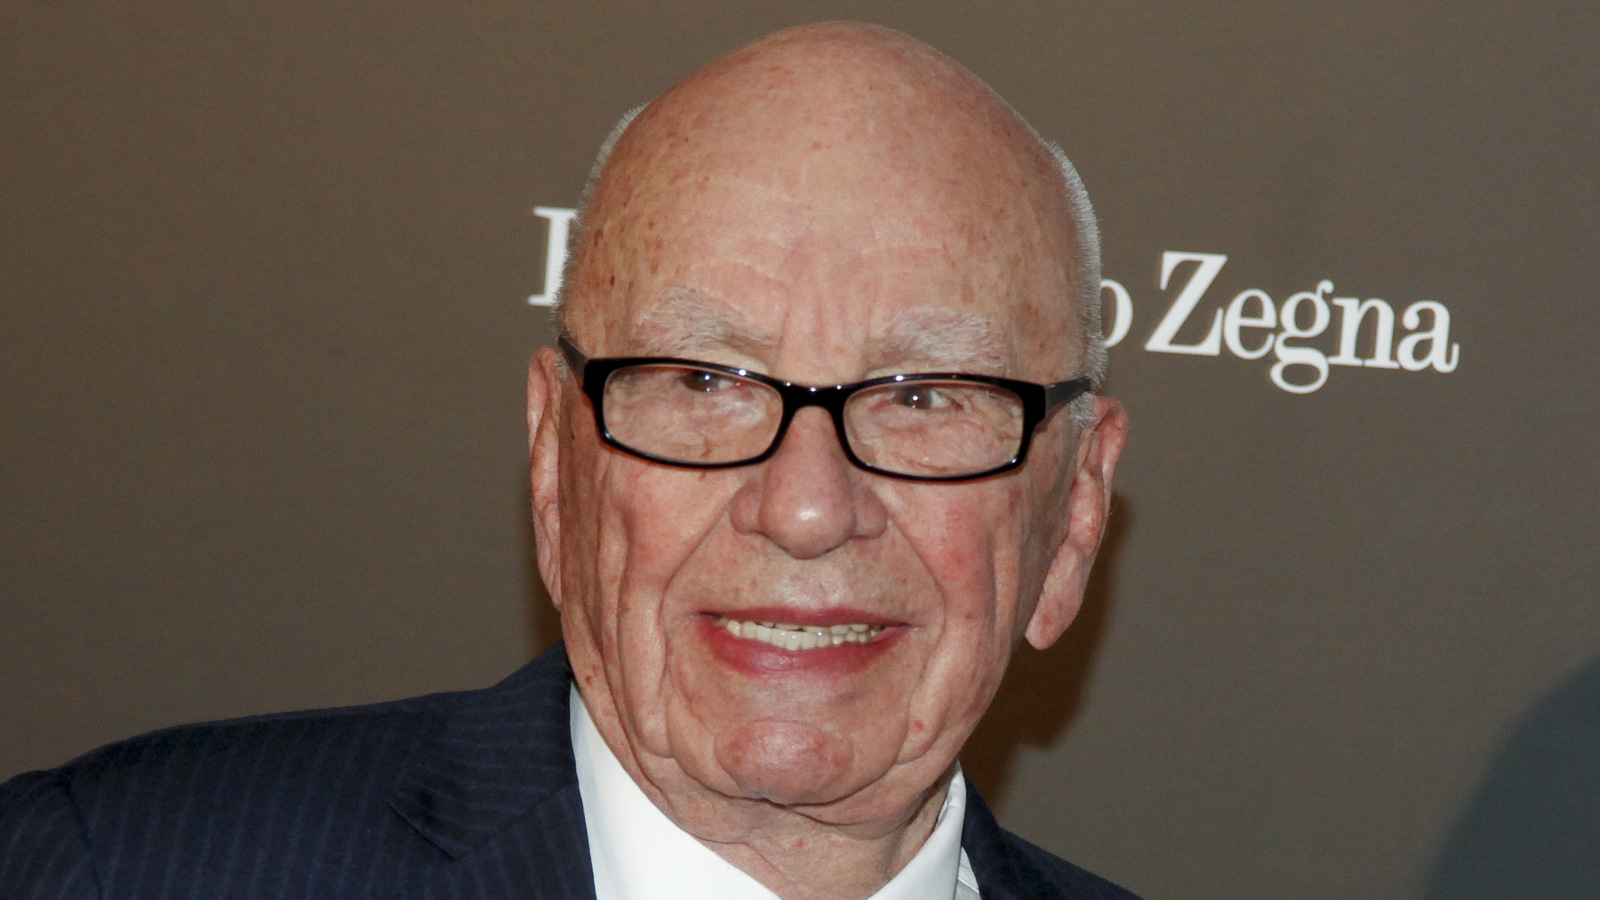 Rupert Murdoch attends the WSJ. Magazine 2014 Innovator Awards at MoMA on Wednesday, Nov. 5, 2014, in New York. (Photo by Andy Kropa/Invision/AP)